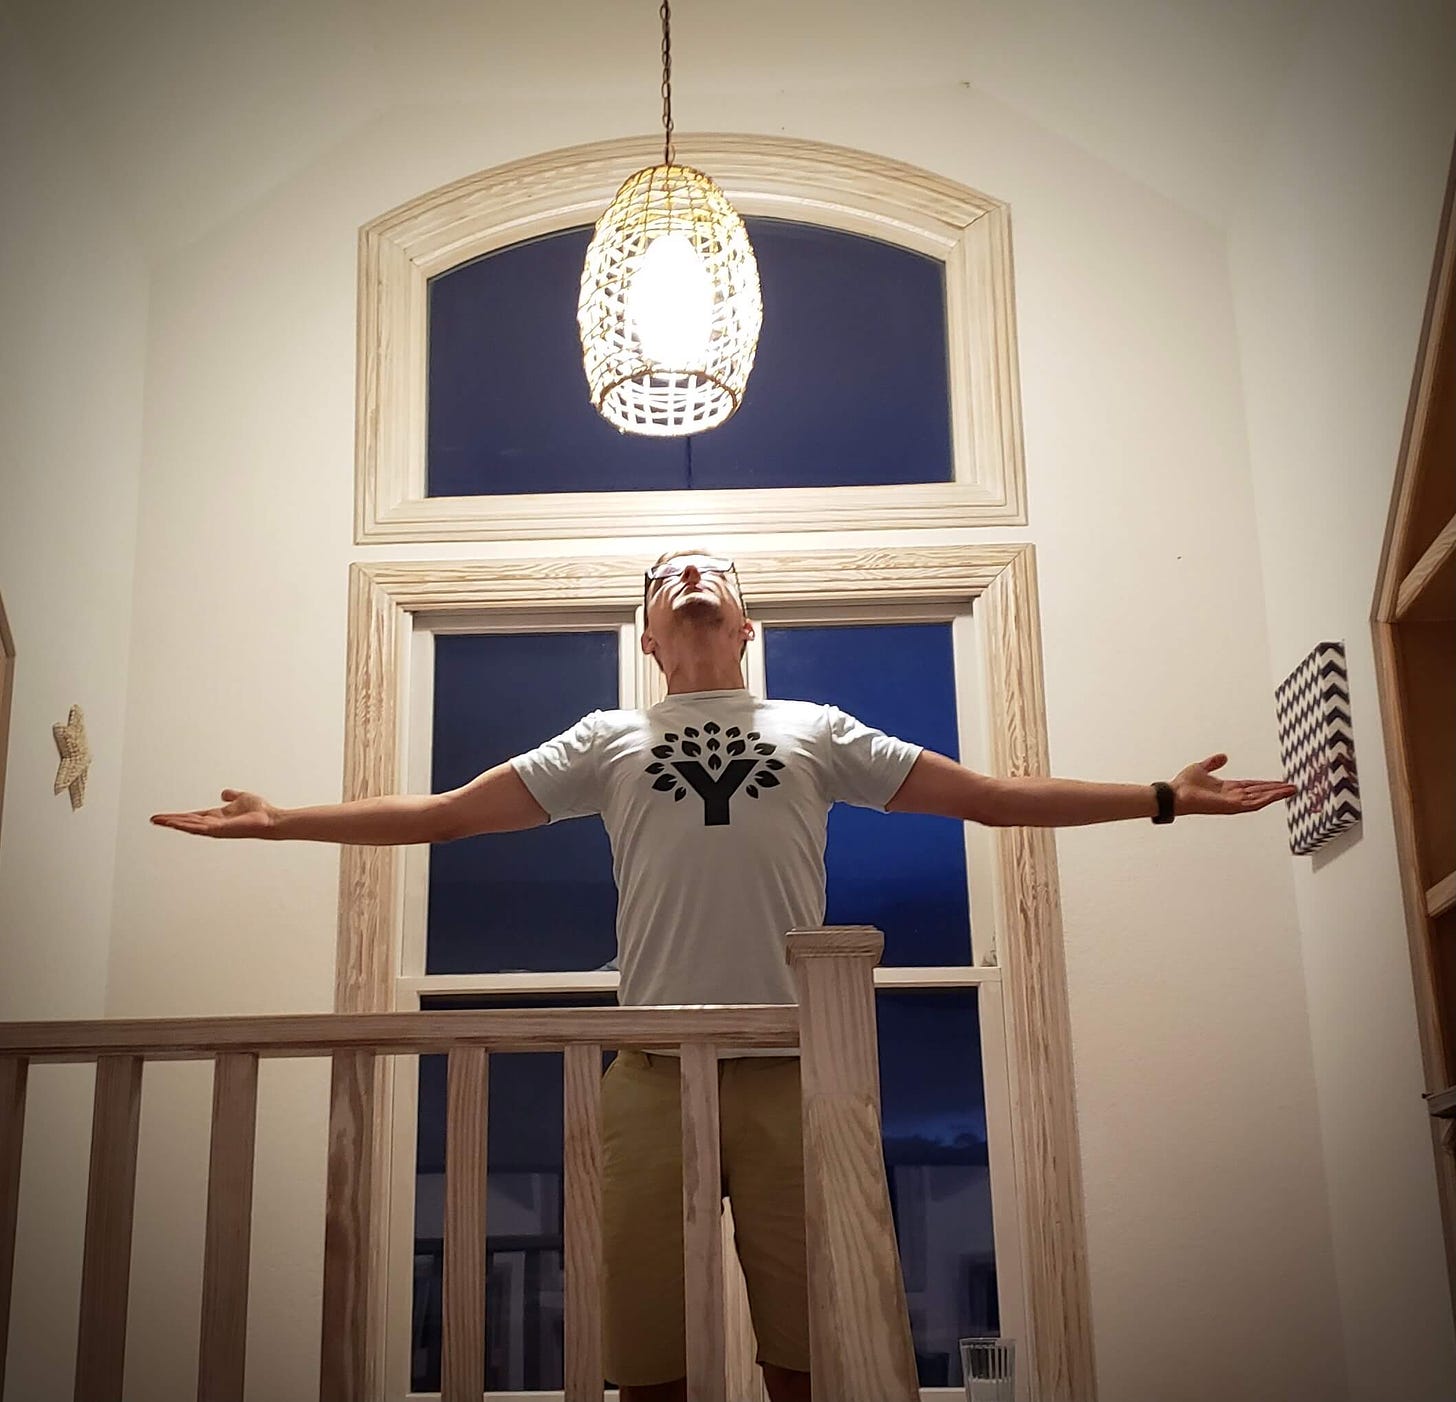 Kyle standing below a light with his arms spread, wearing a YNAB tshirt